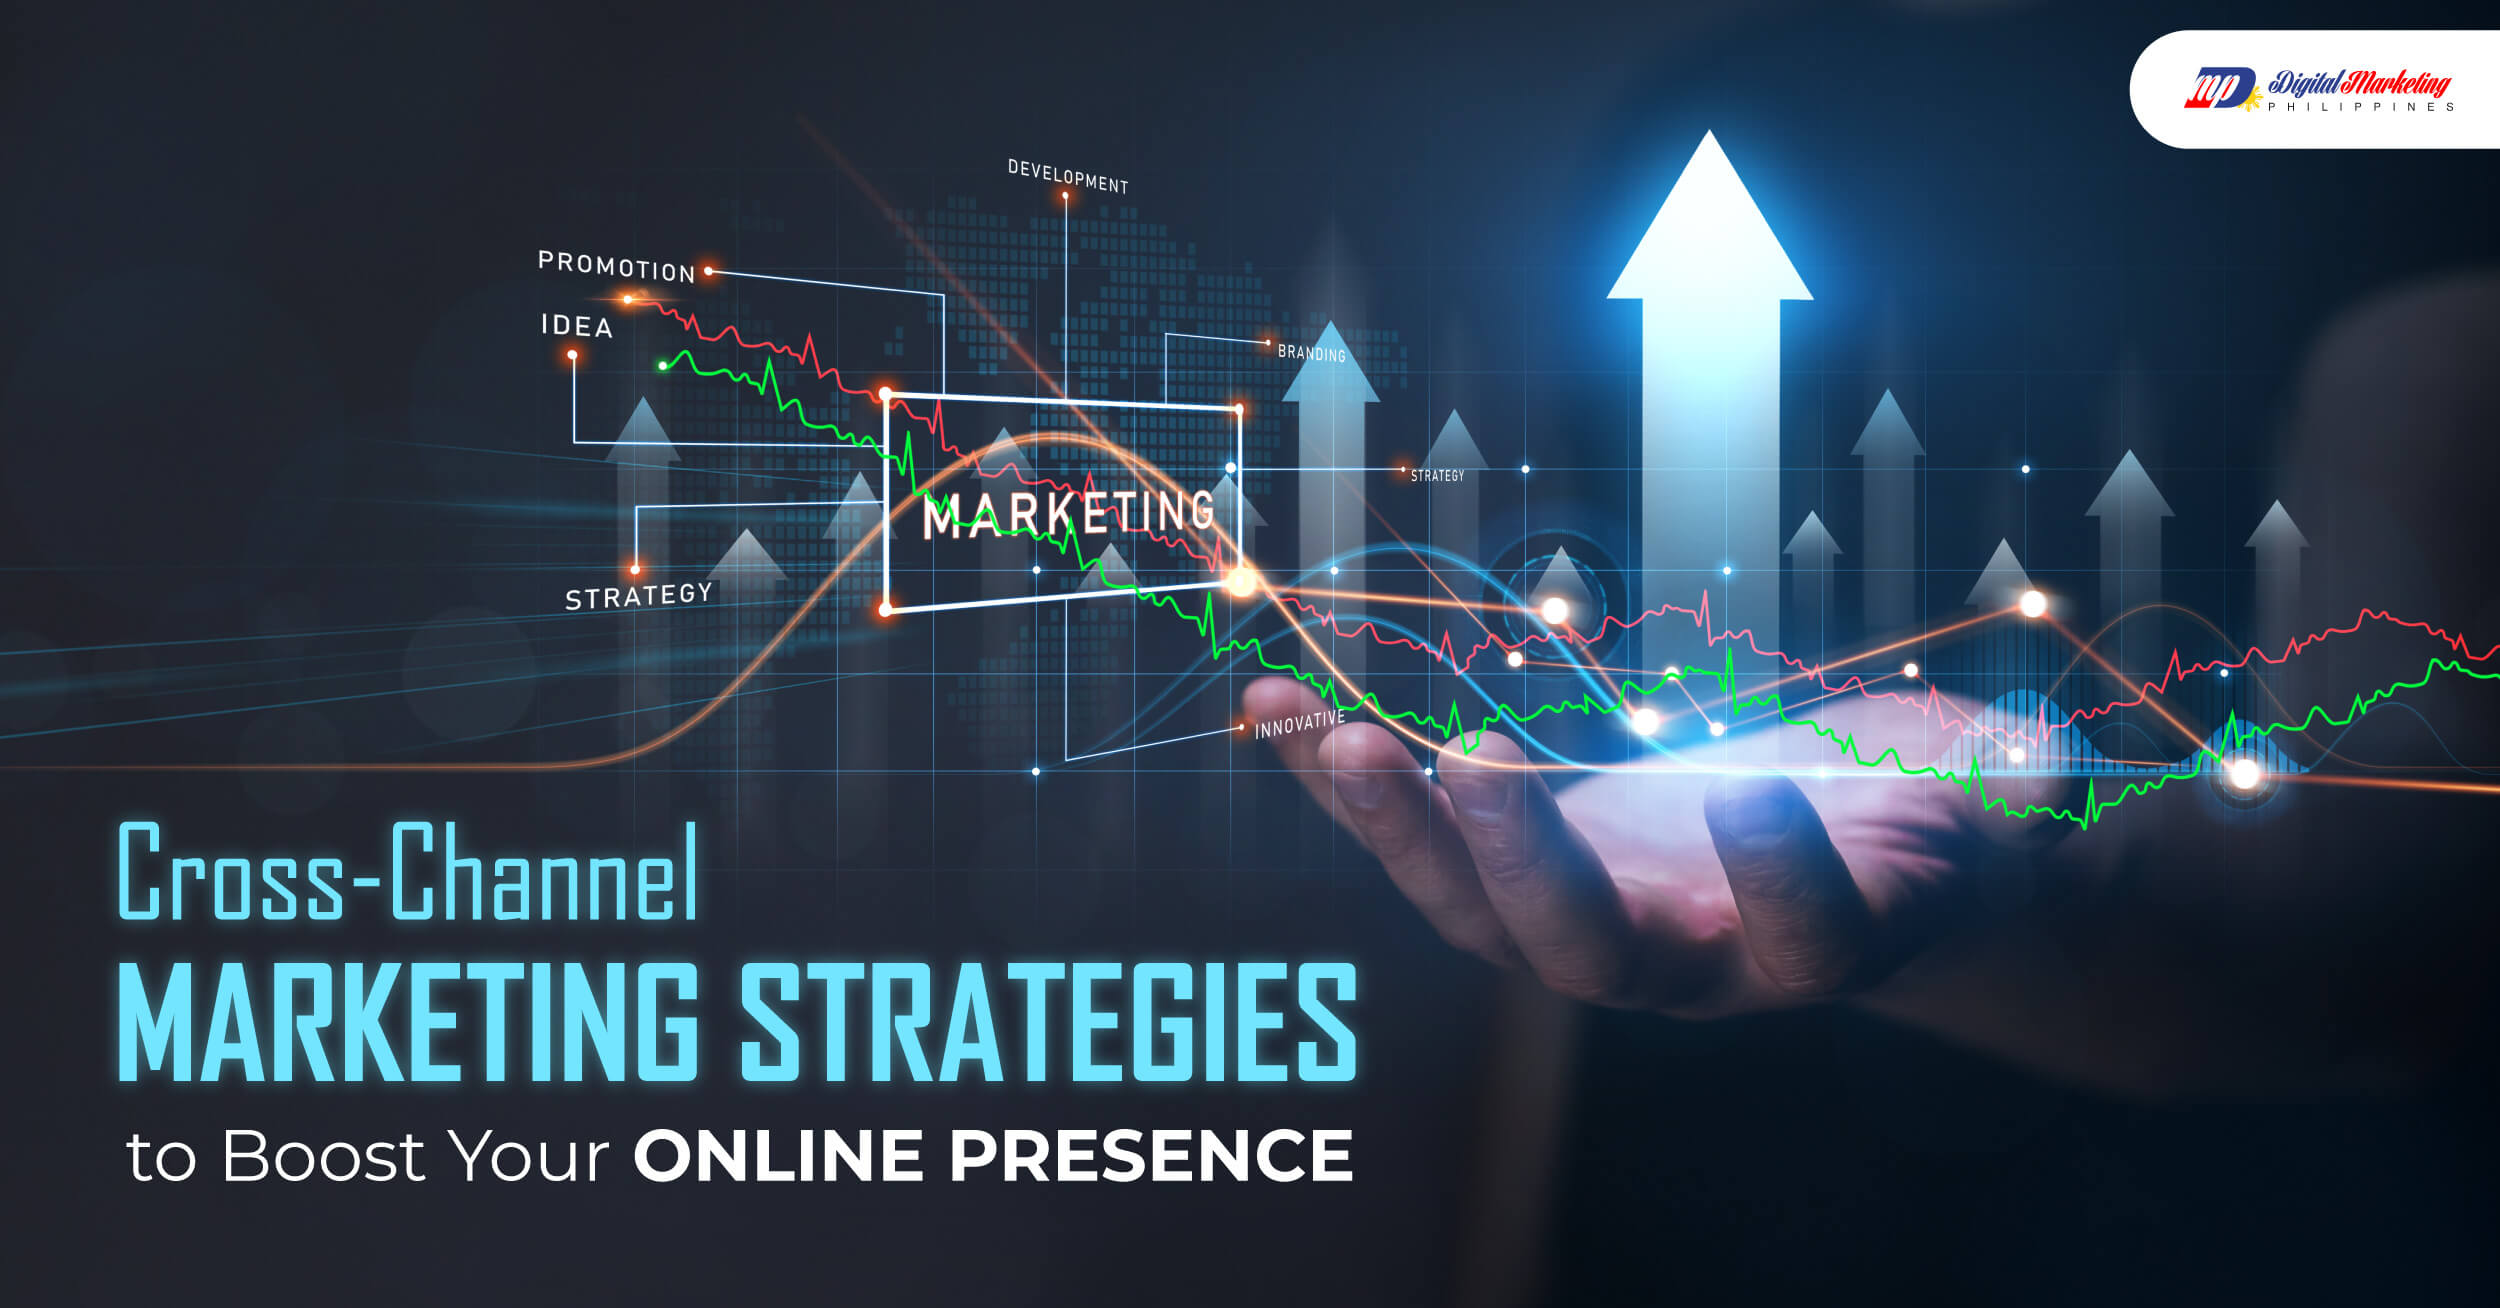 Cross-Channel Marketing Strategies to Boost Your Online Presence featured image